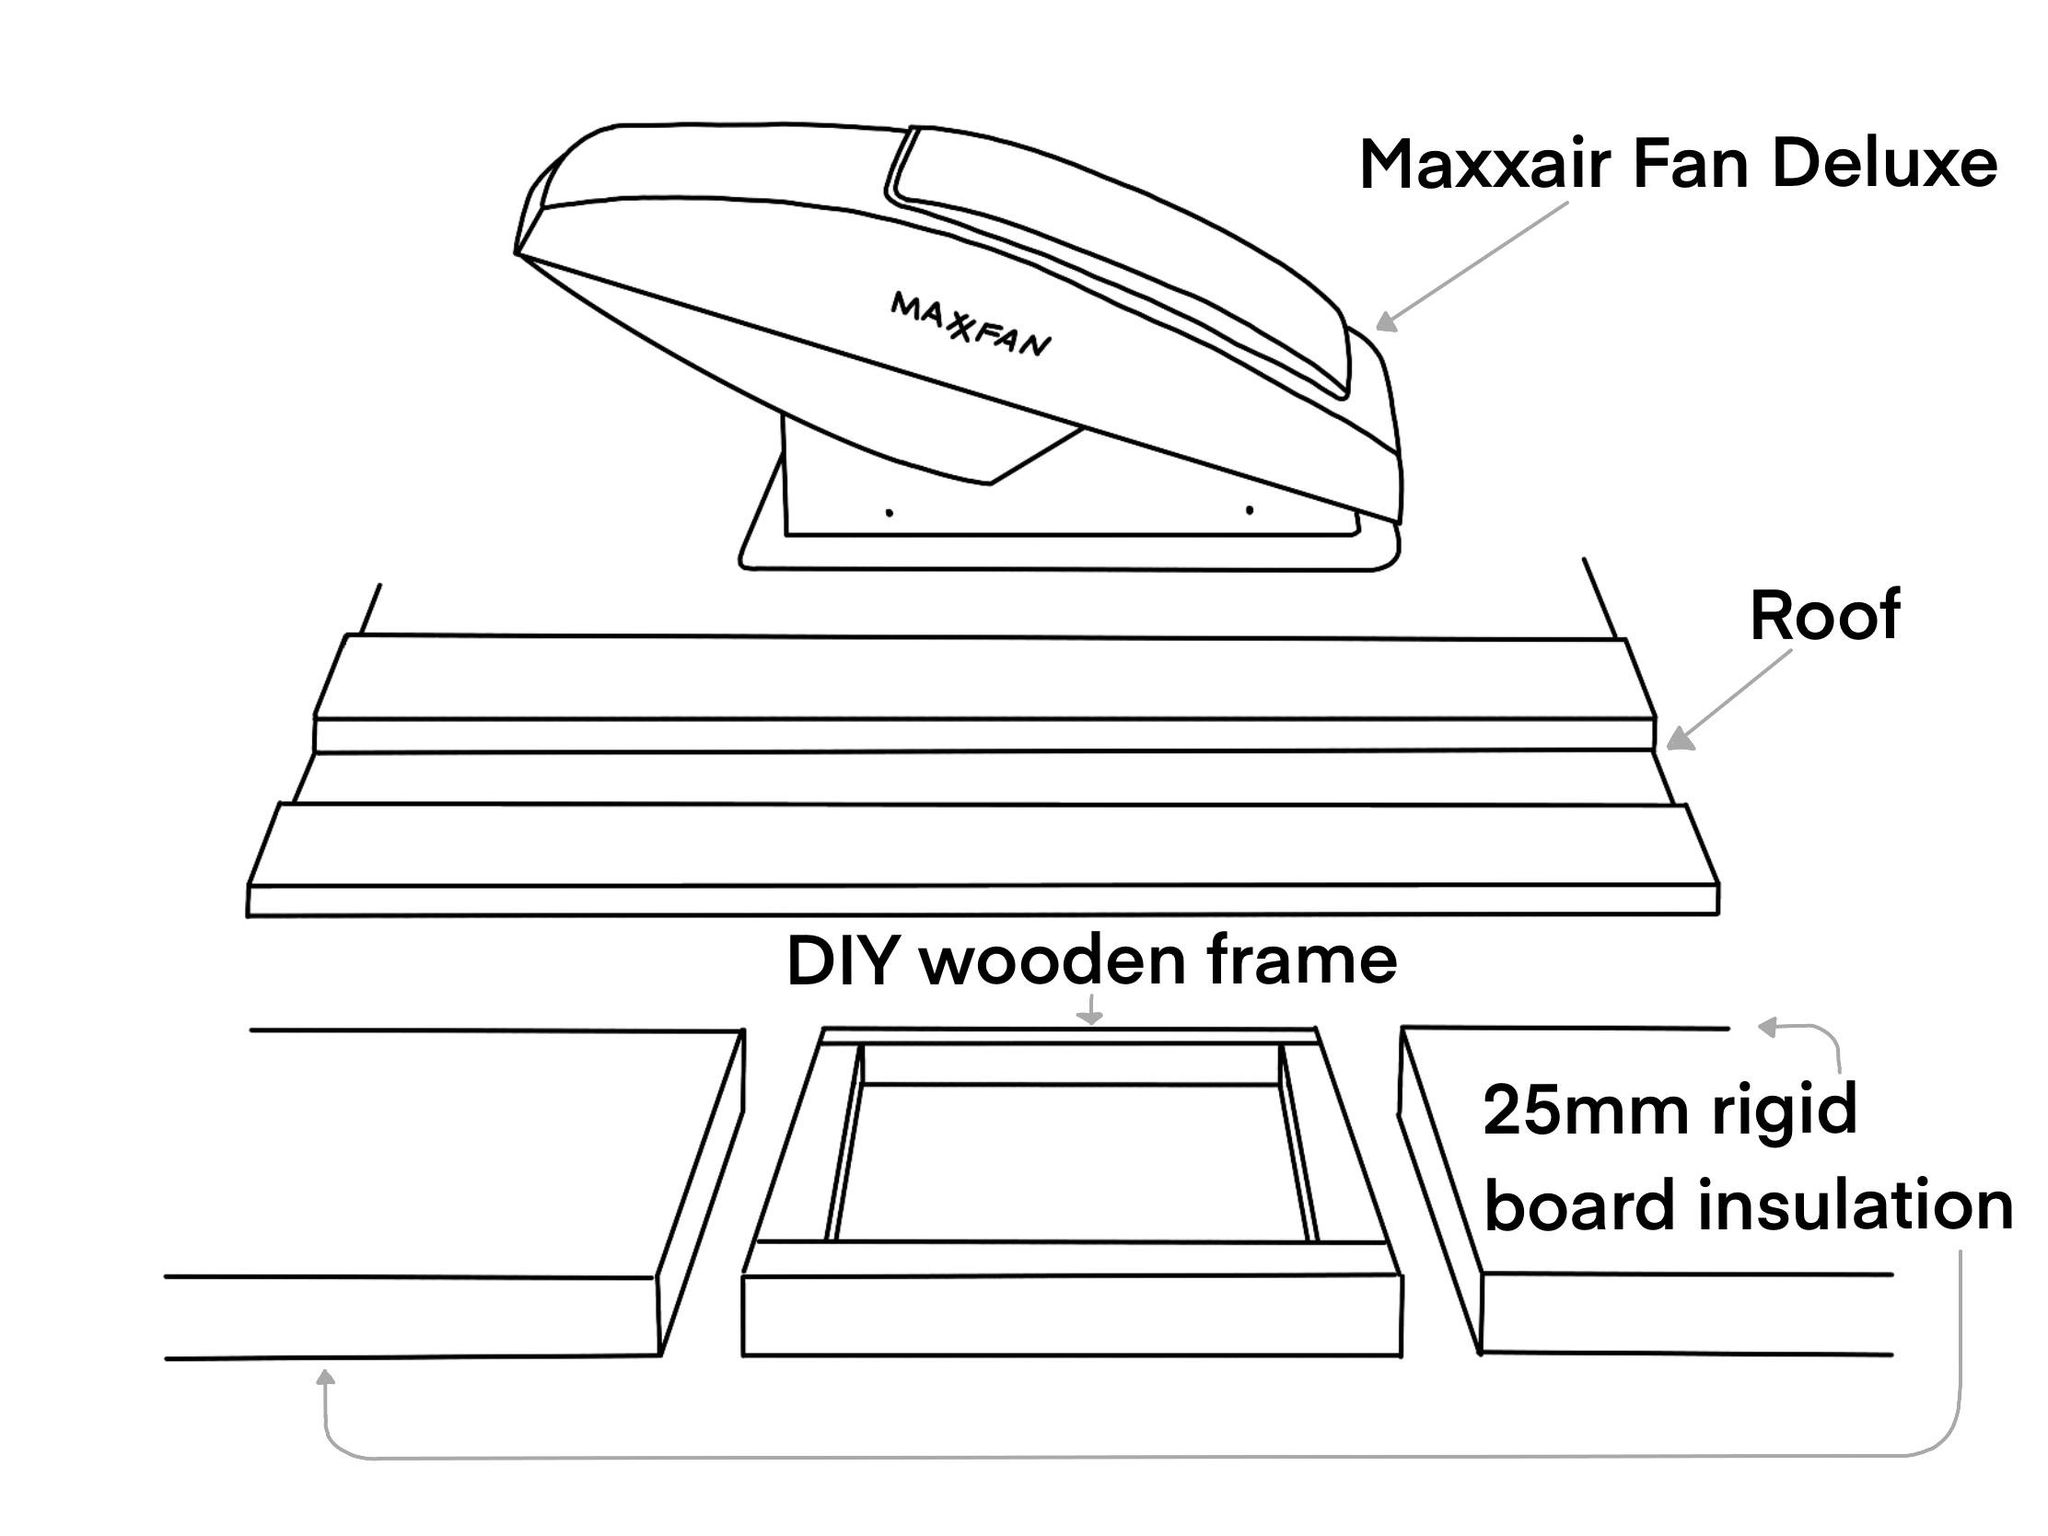 How to Install a MAXXAIR Fan Deluxe This Pair Go There